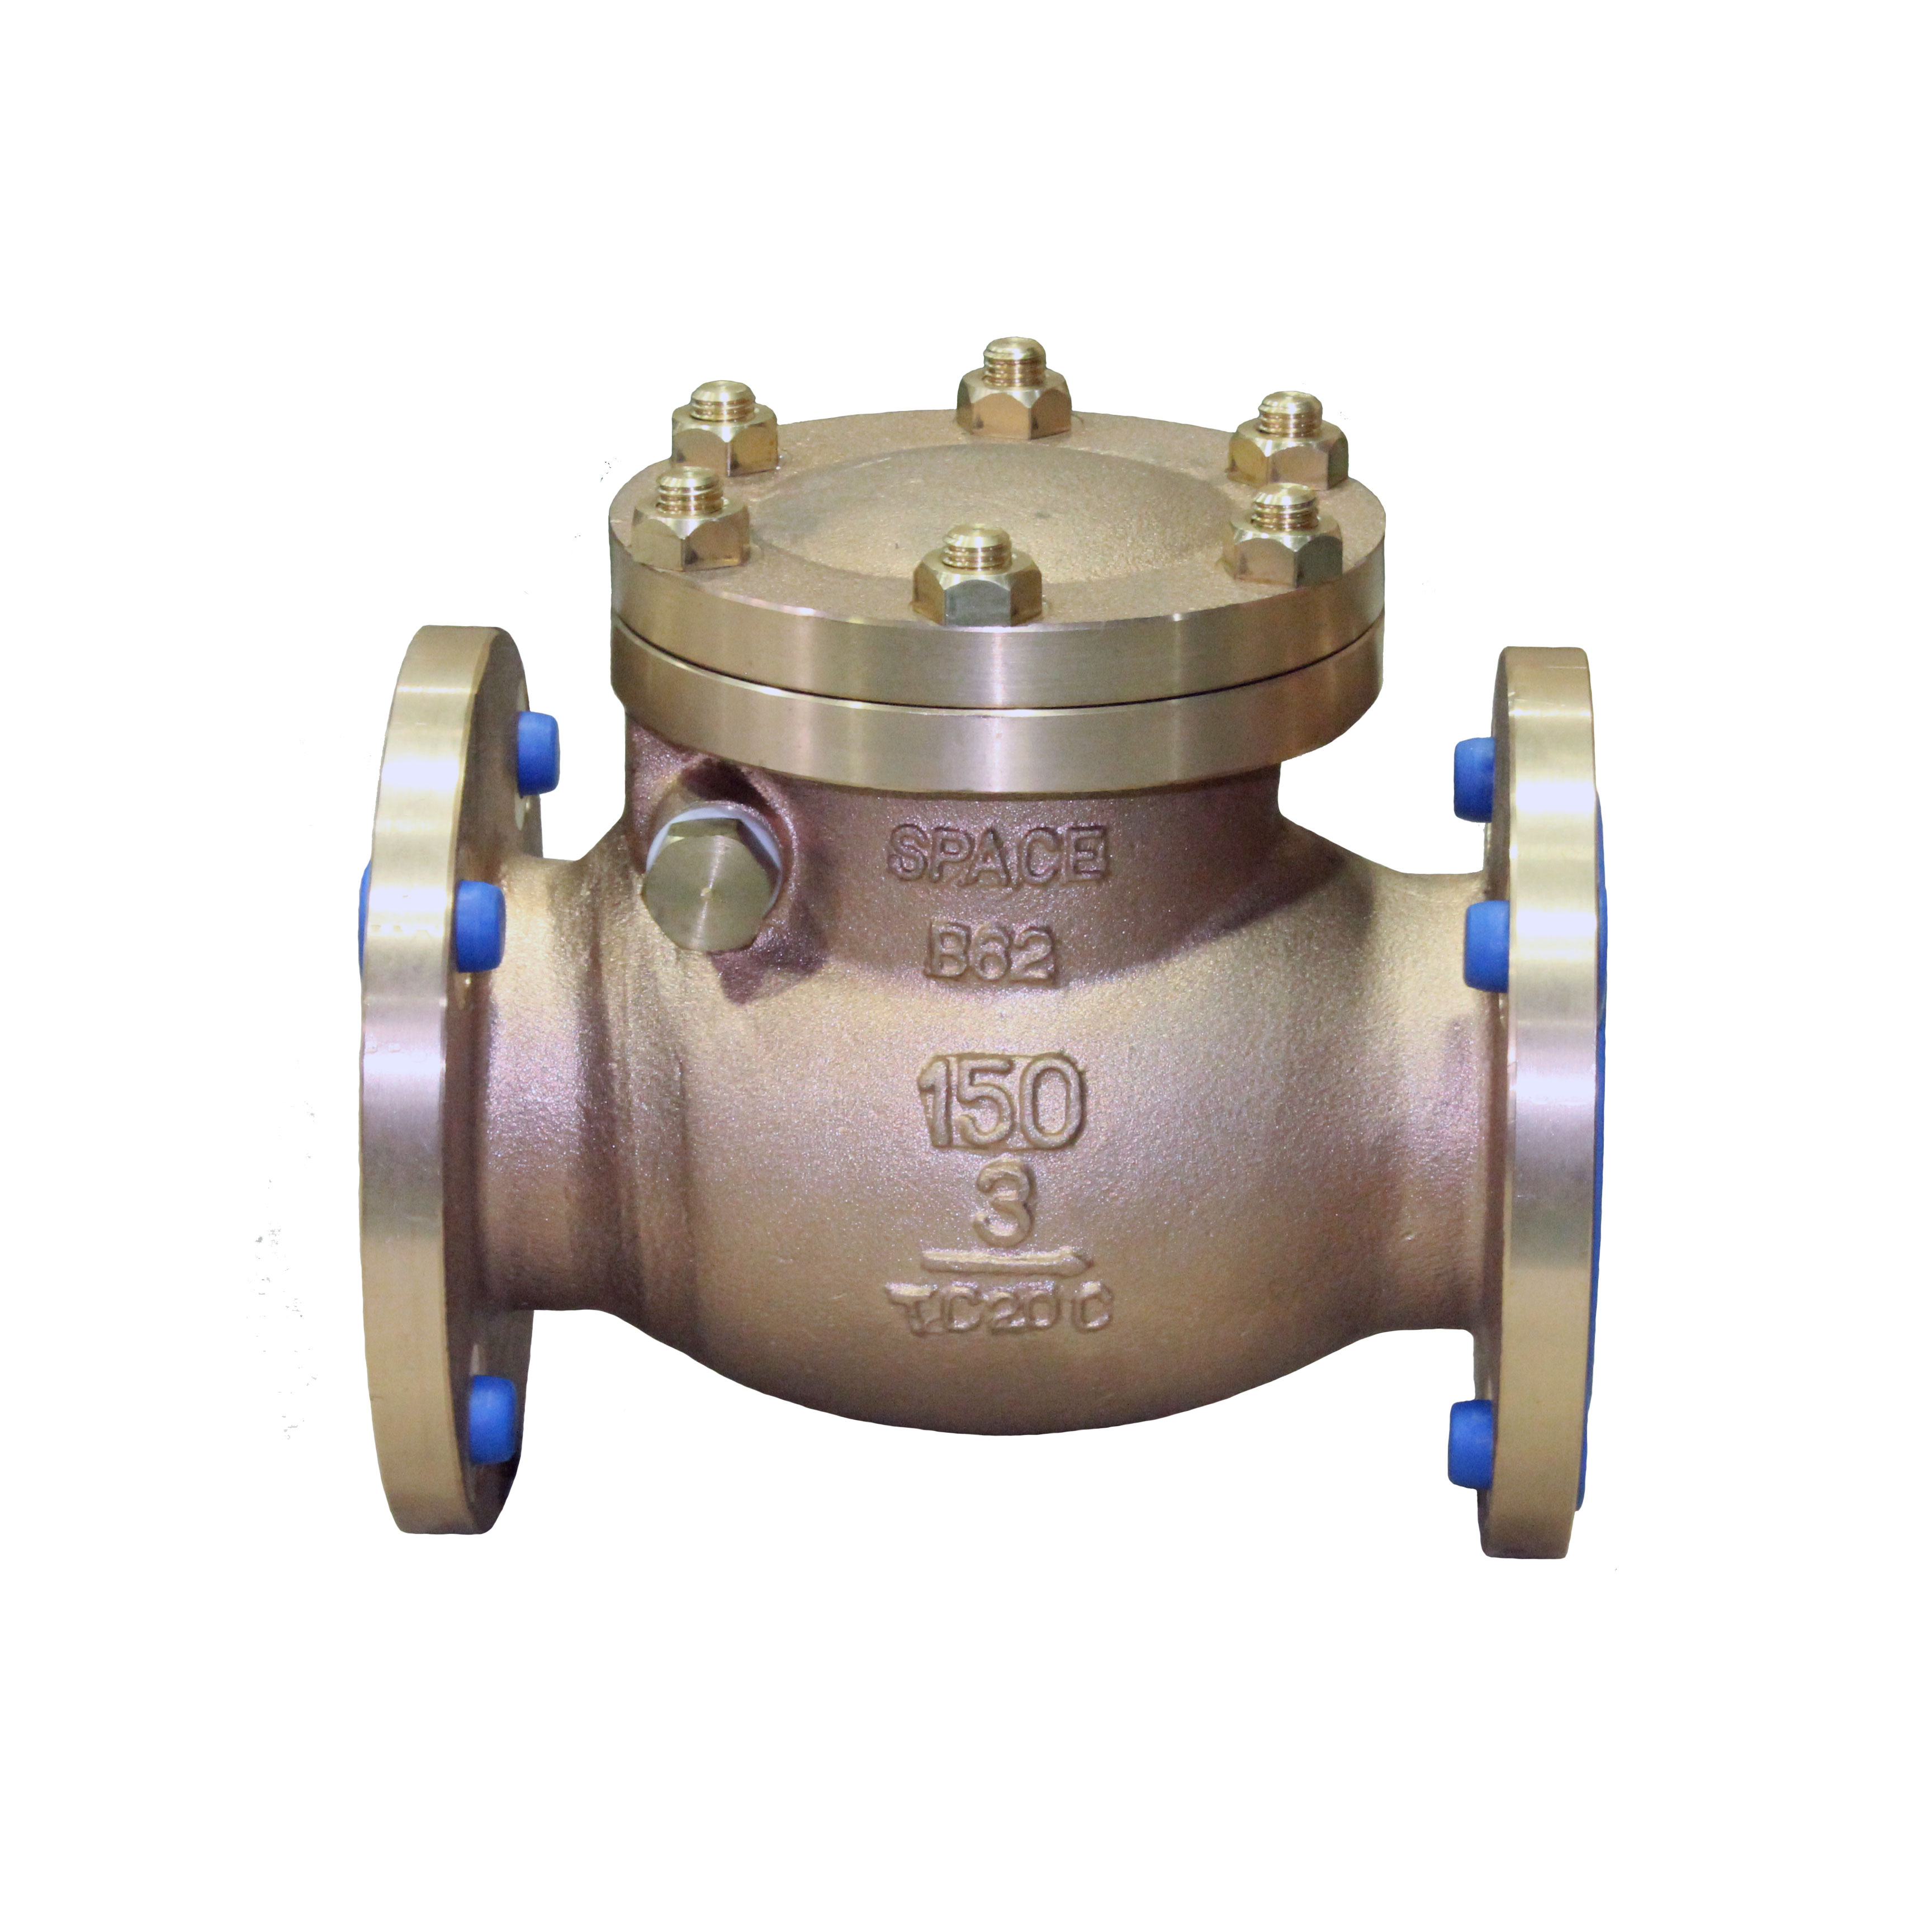 American Valve G31 1 Lead-Free Brass Swing Check Valve with FIP Threaded Ends 1